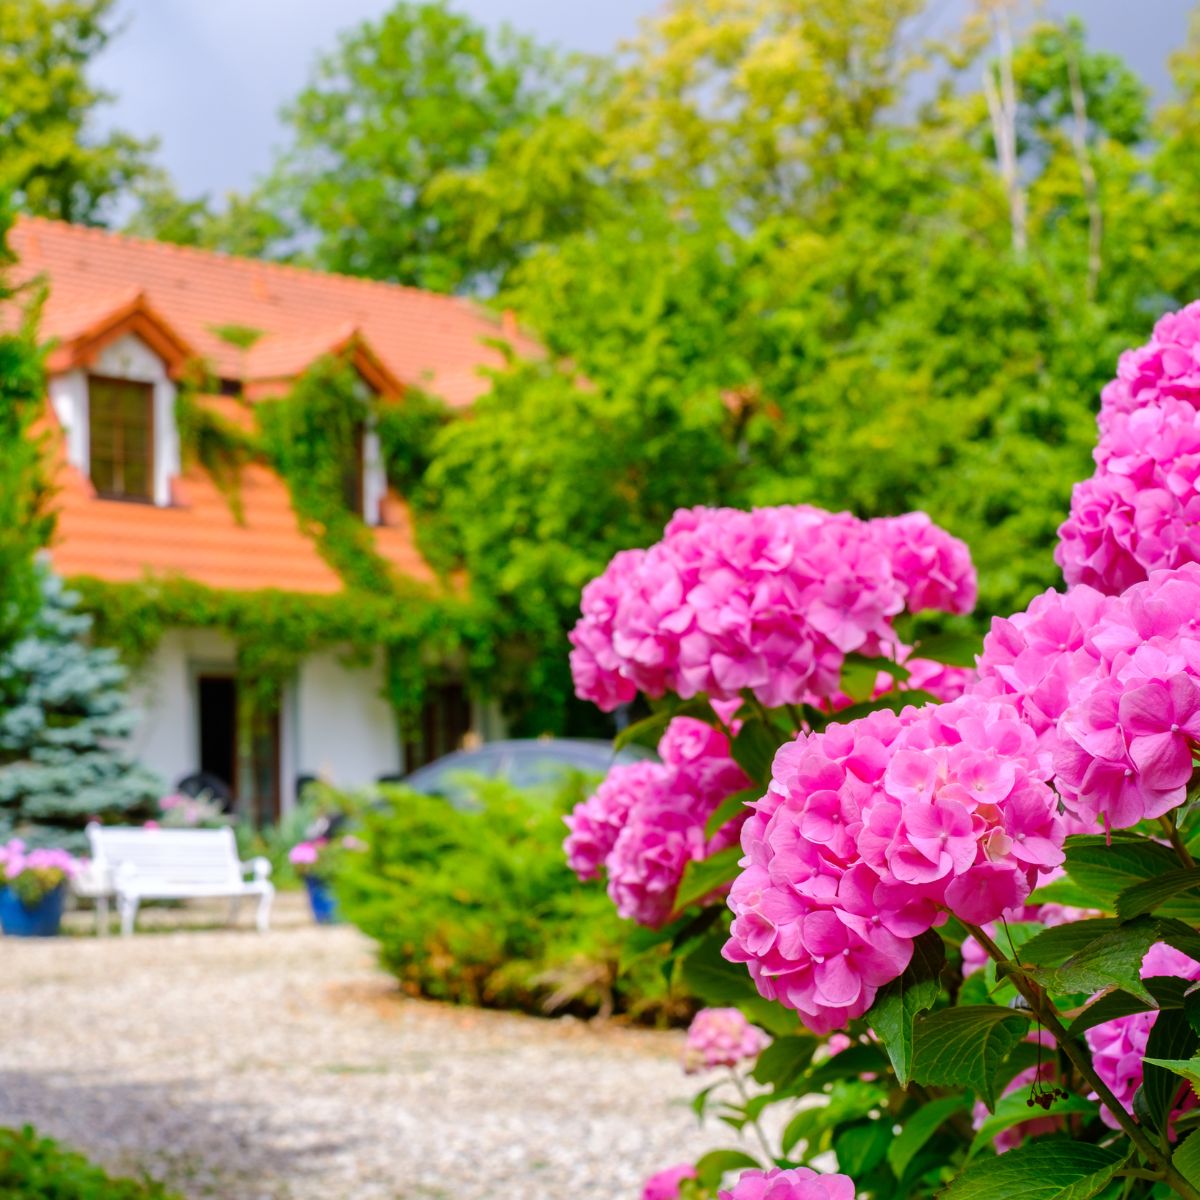 Big, bright pink hydrangeas with the house in the background.